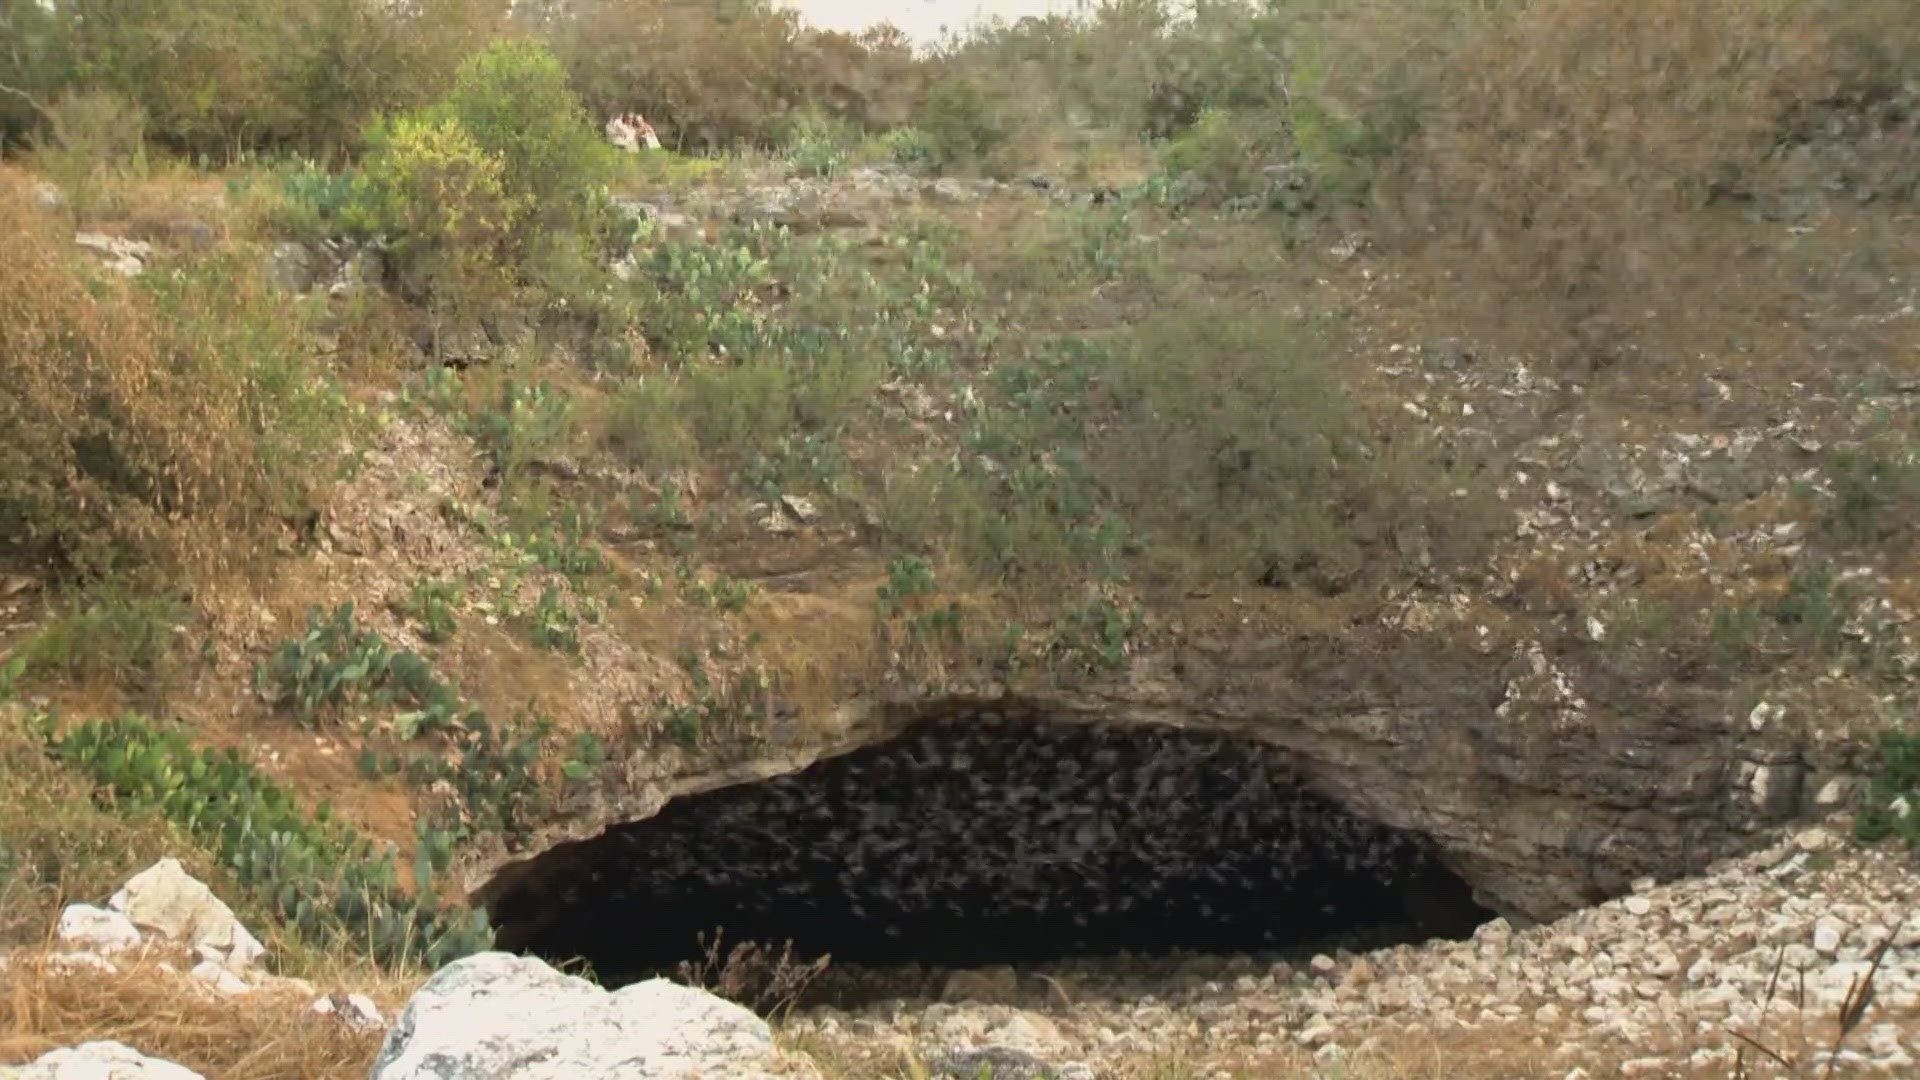 Between 15 and 20 million Mexican free-tailed bats have lived in the Bracken Bat Cave for an estimated 10,000 years.